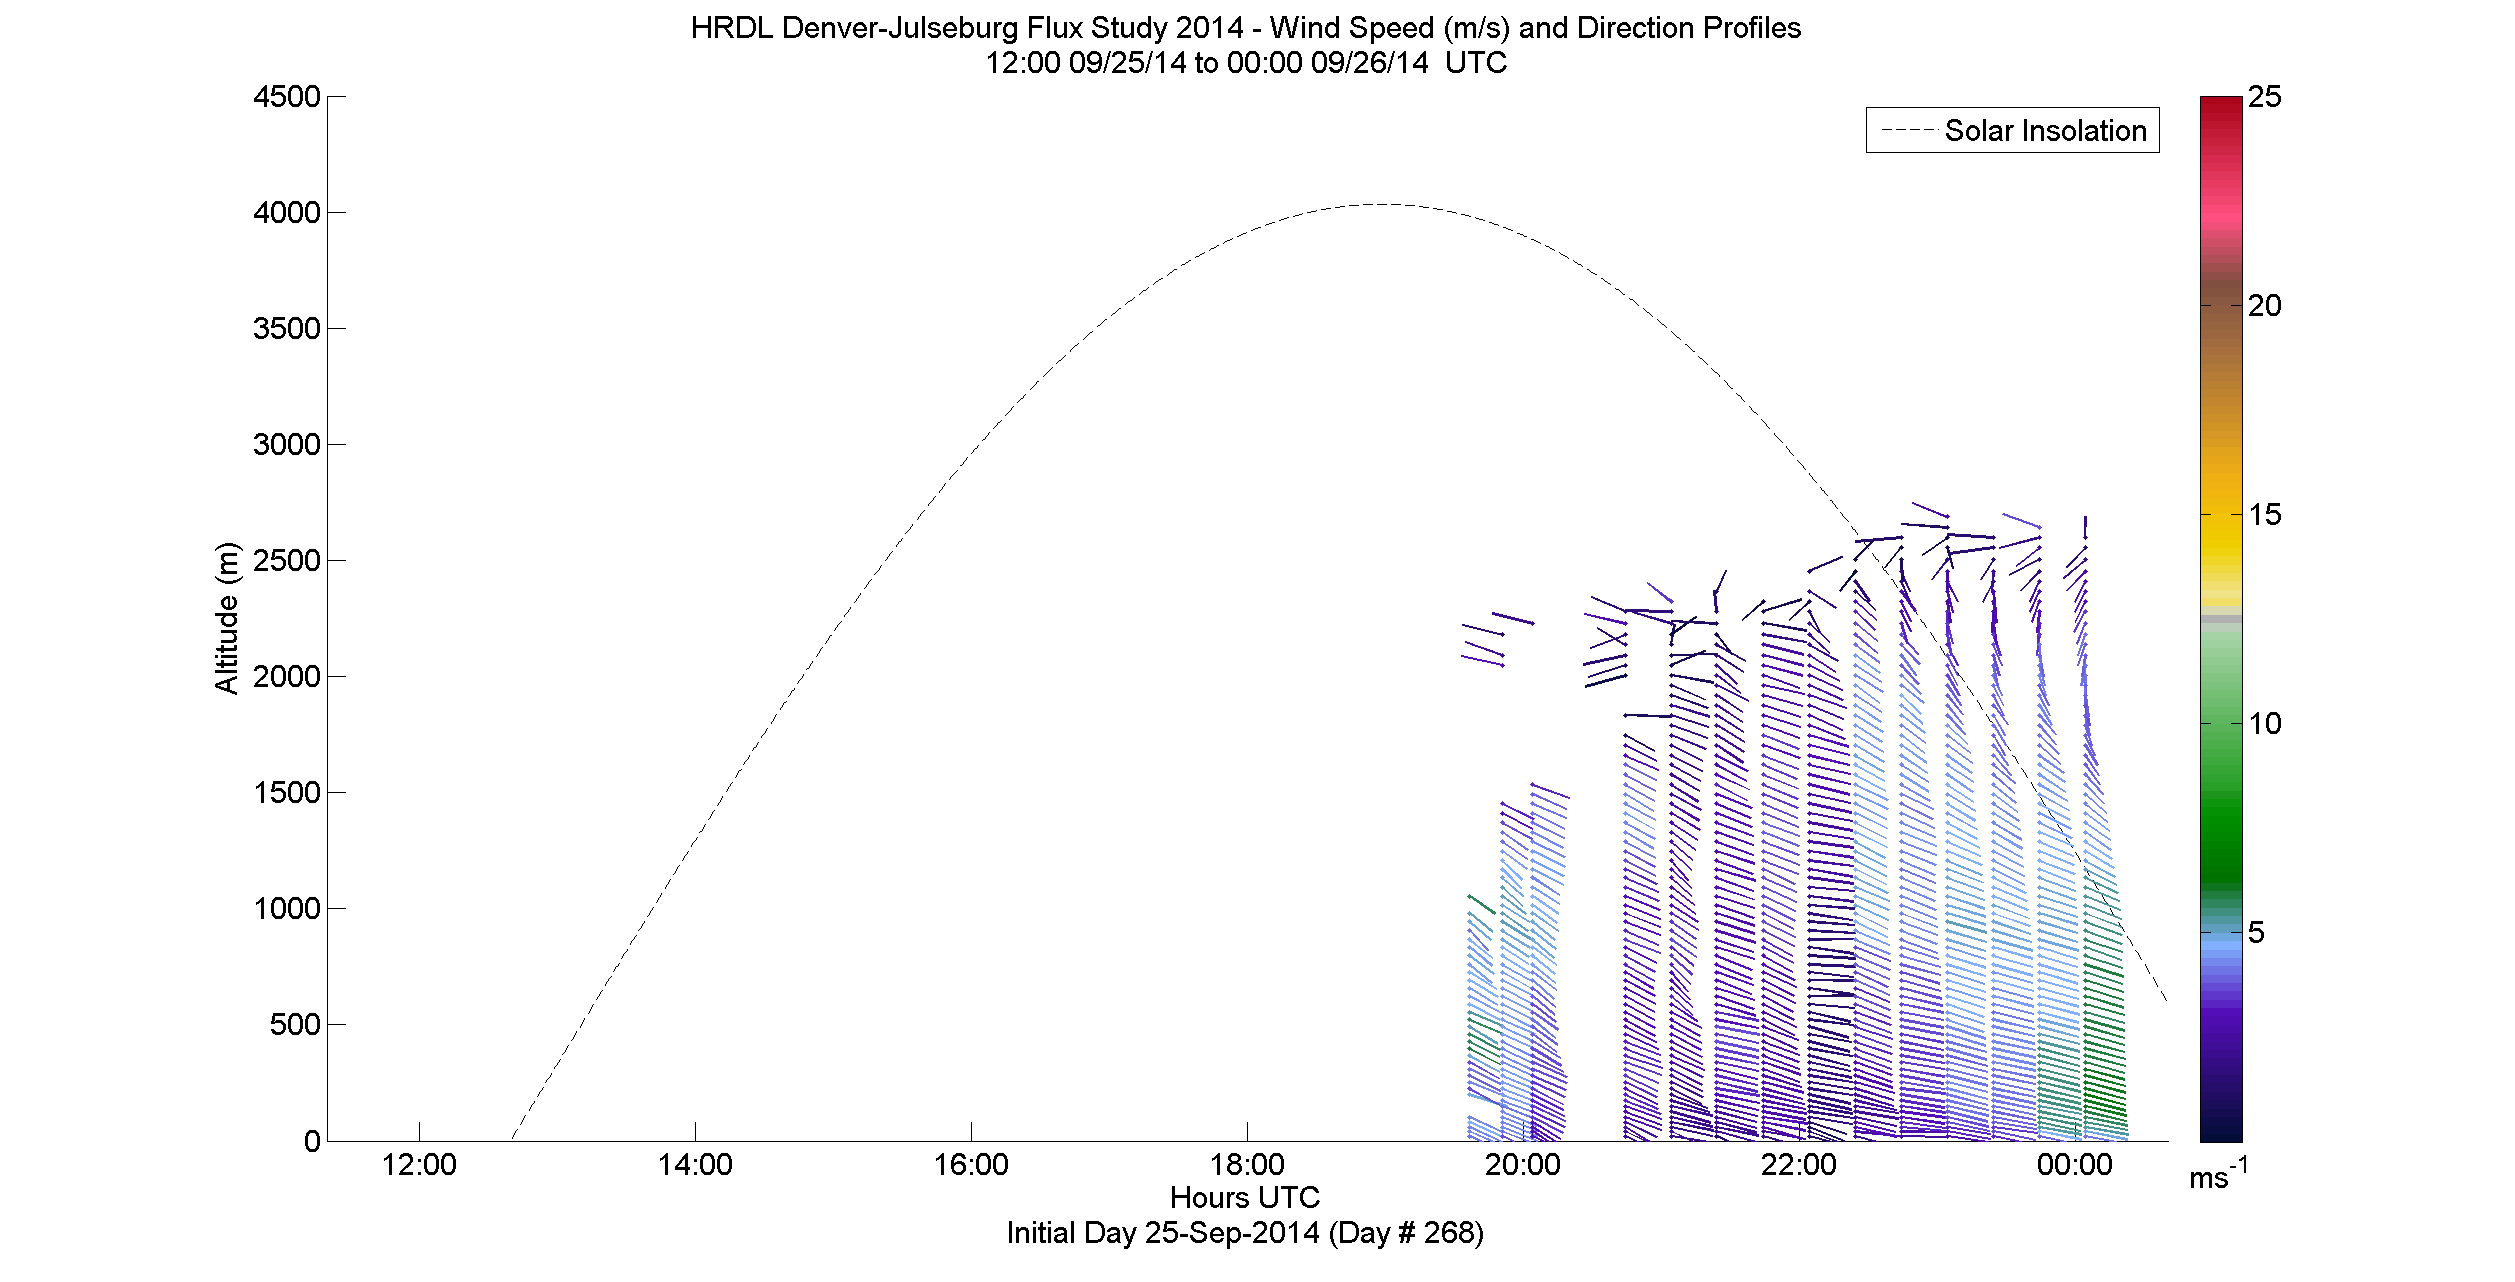 HRDL speed and direction profile - September 25 pm